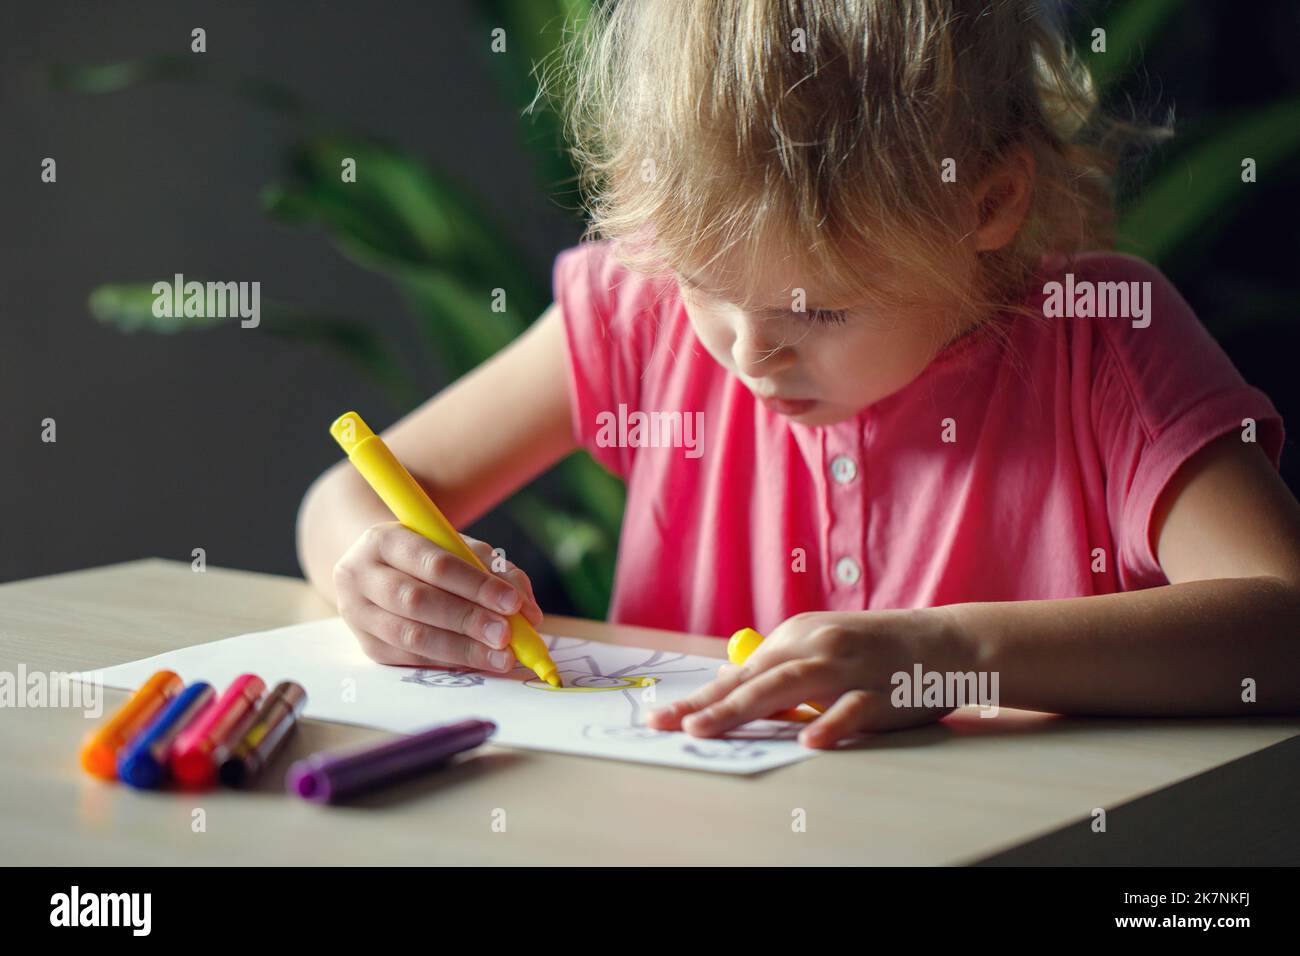 https://c8.alamy.com/comp/2K7NKFJ/child-drawing-a-picture-with-colored-markers-little-girl-sitting-at-the-desk-2K7NKFJ.jpg